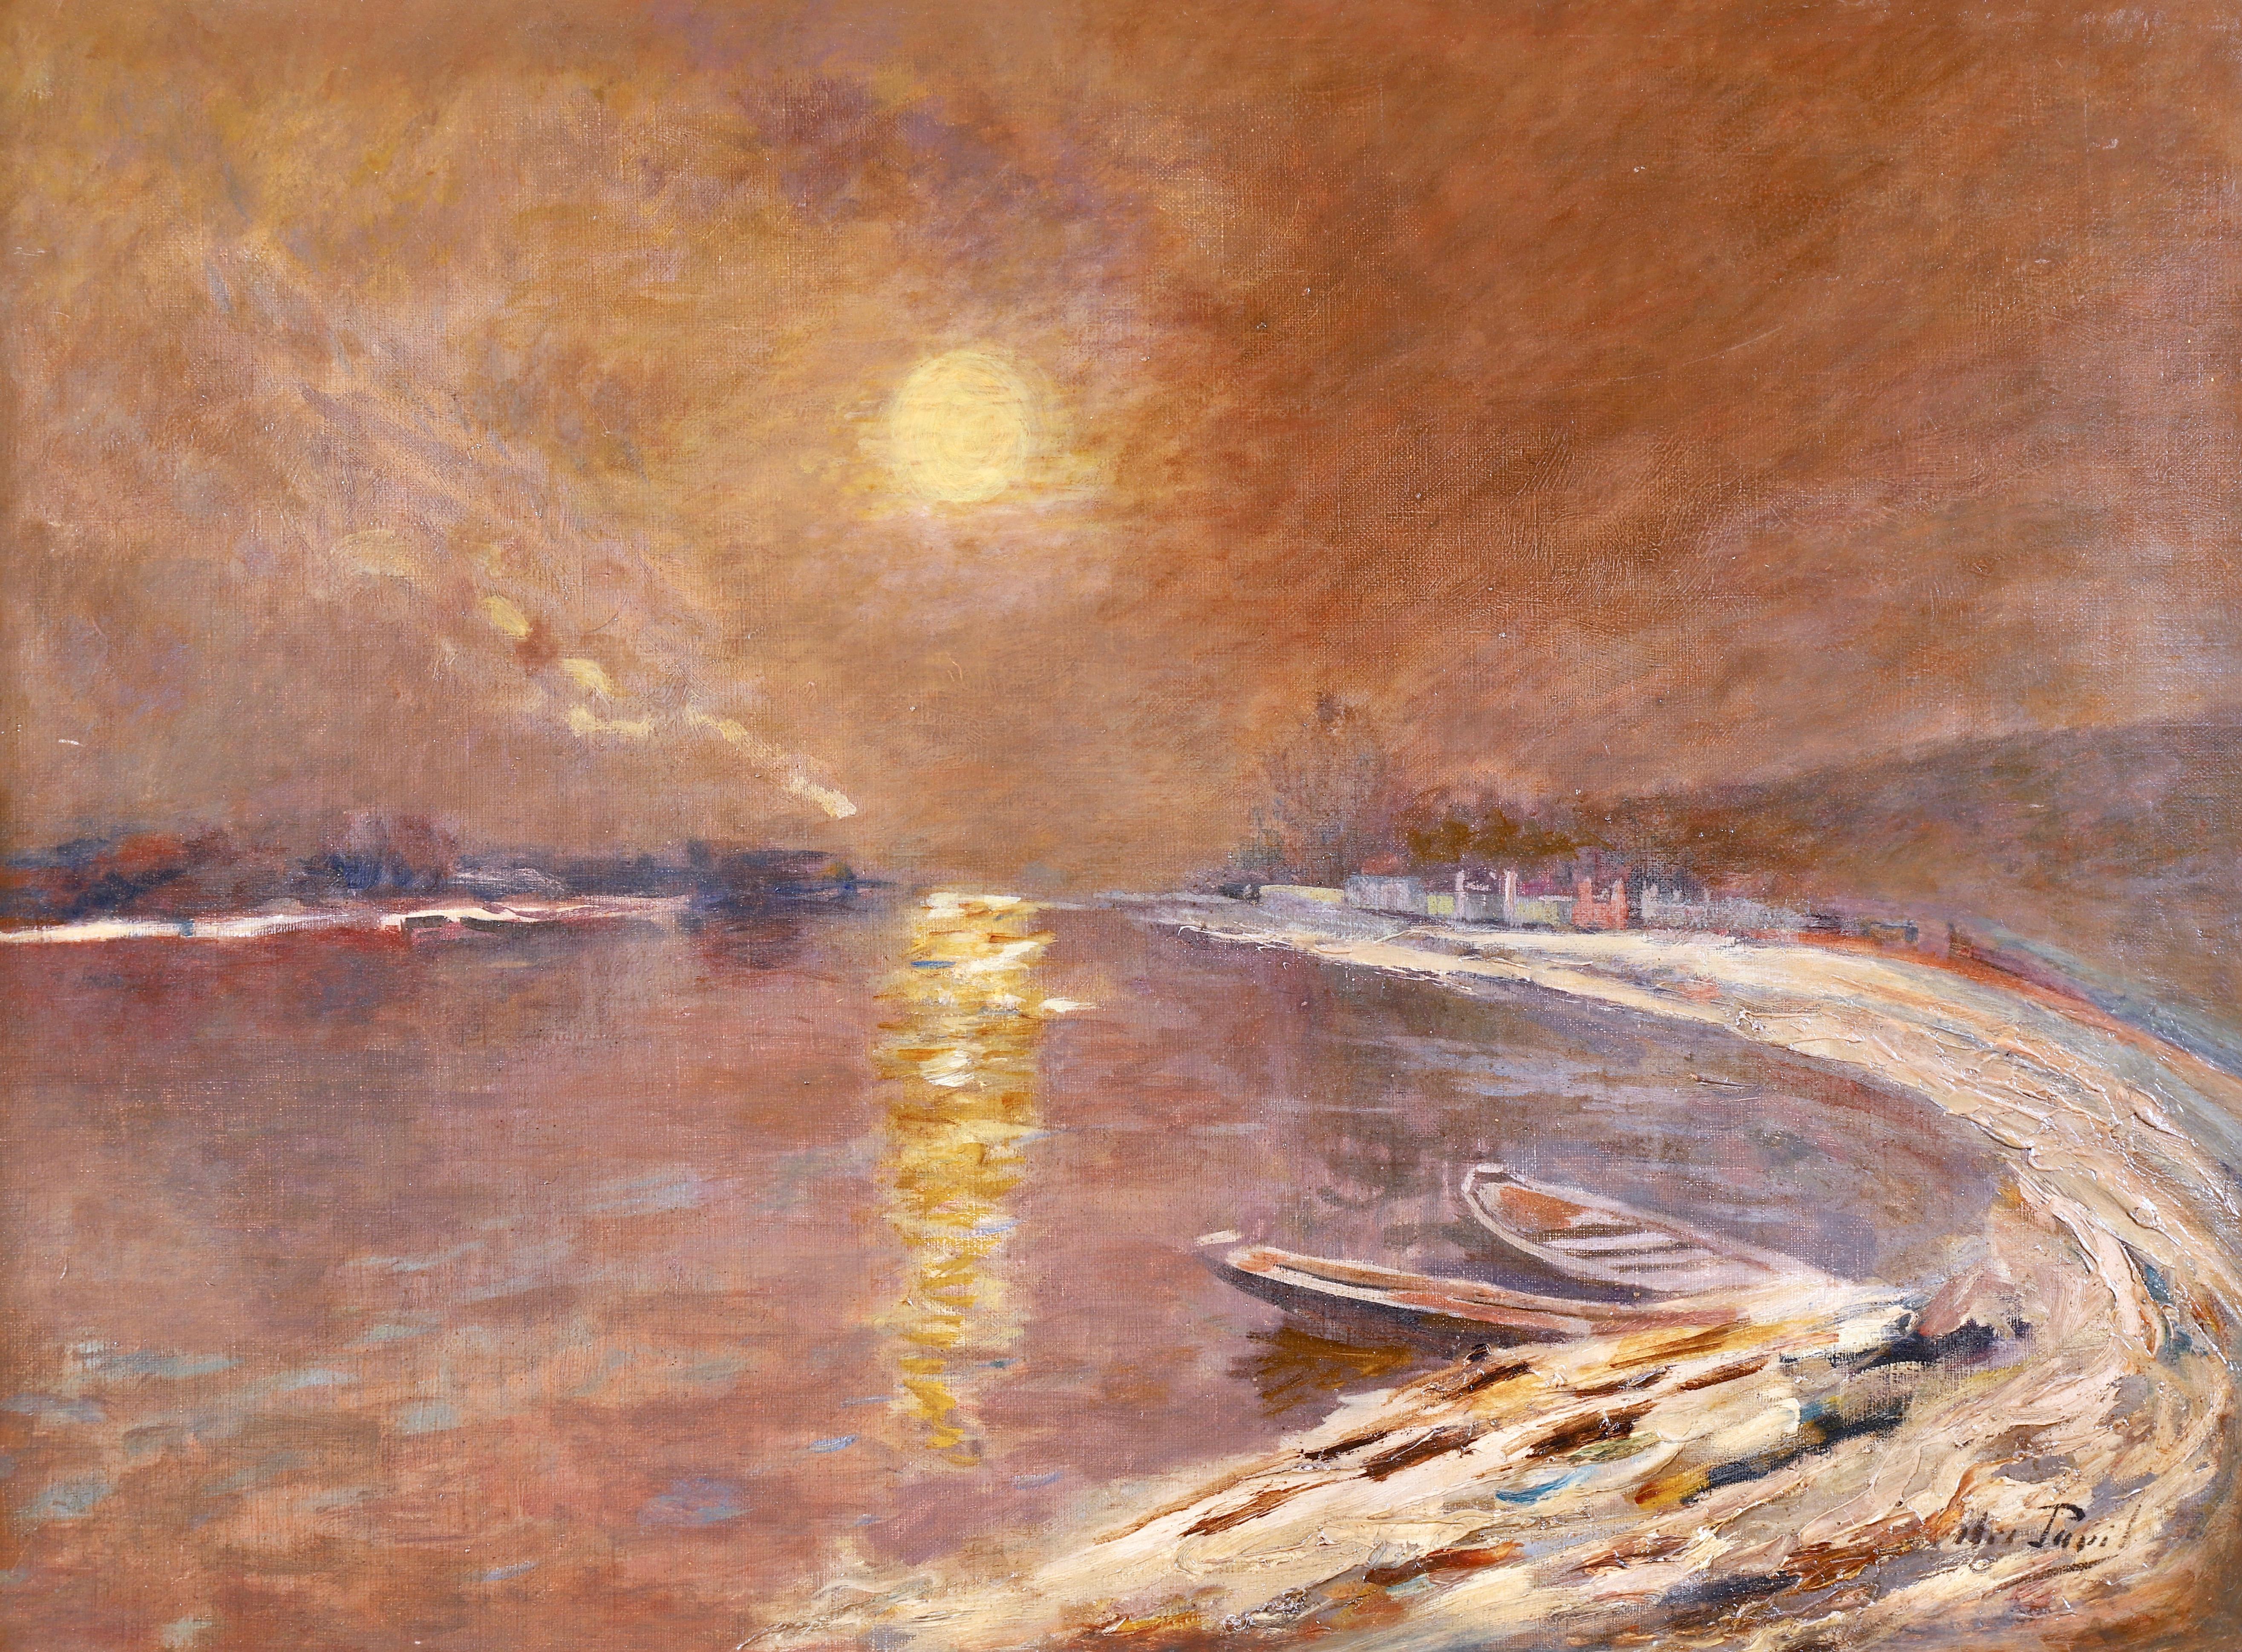 Moonlight on the Seine - Post Impressionist Oil, Night Riverscape by Elie Pavil